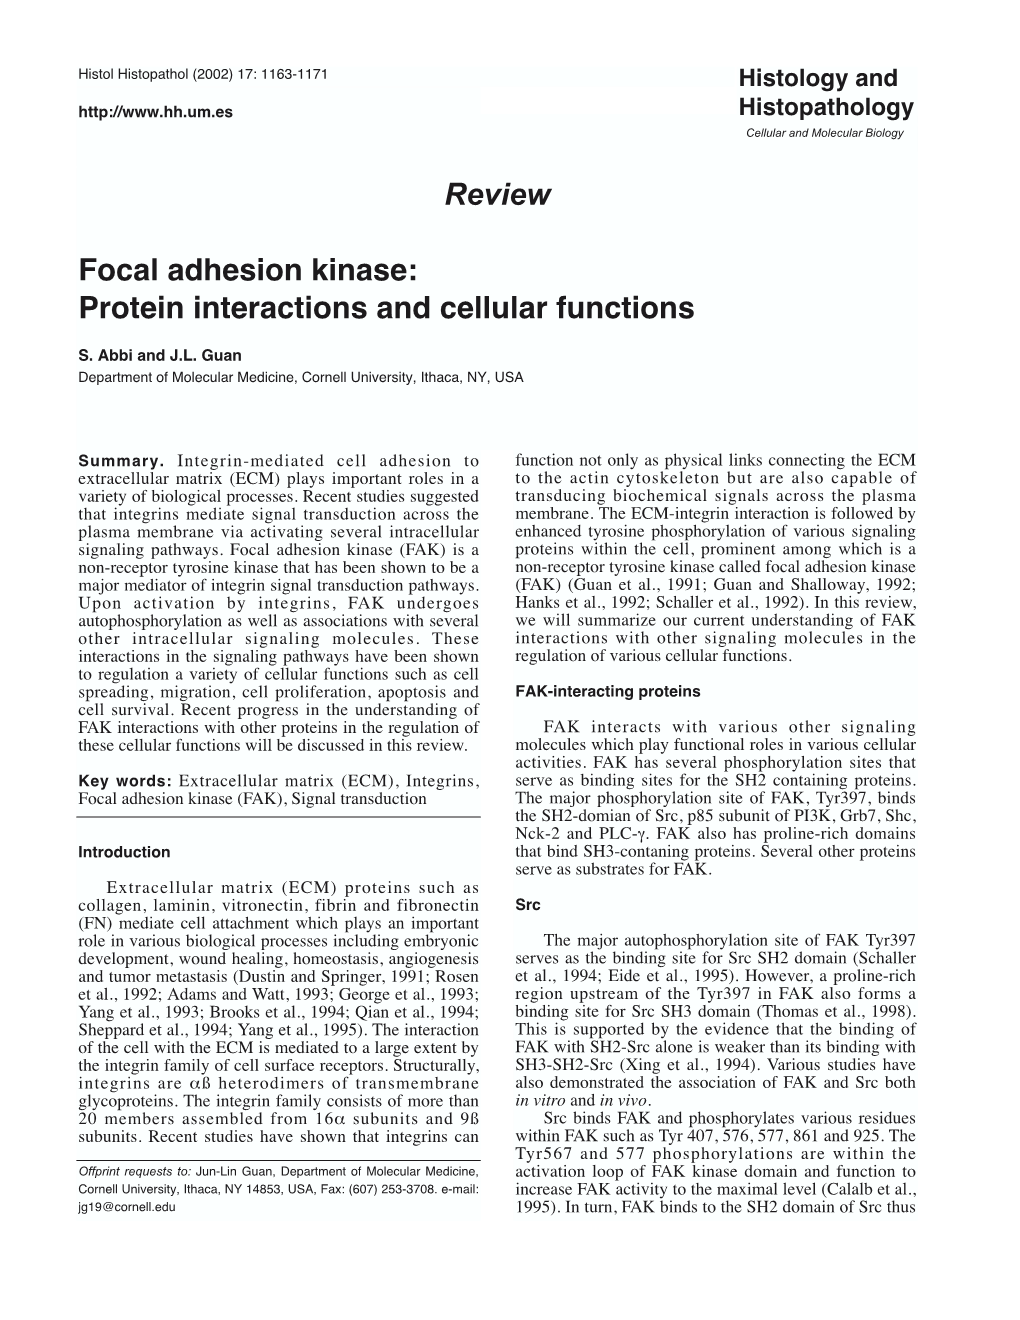 Review Focal Adhesion Kinase: Protein Interactions And